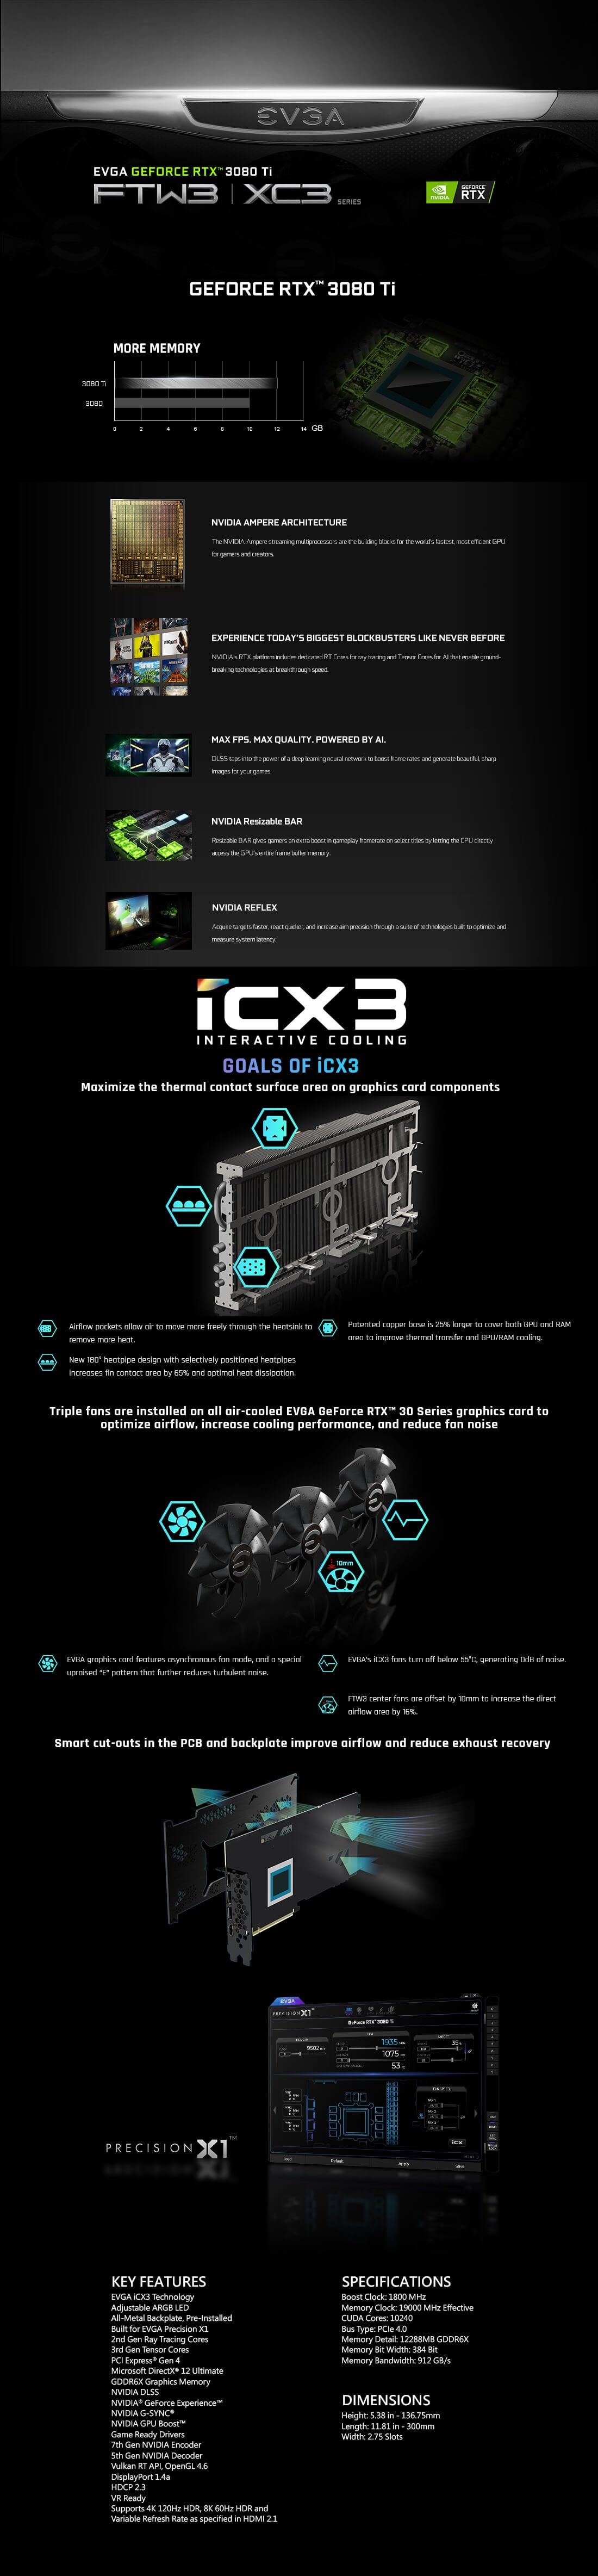 A large marketing image providing additional information about the product eVGA GeForce RTX 3080 Ti FTW3 Ultra 12GB GDDR6X - Additional alt info not provided